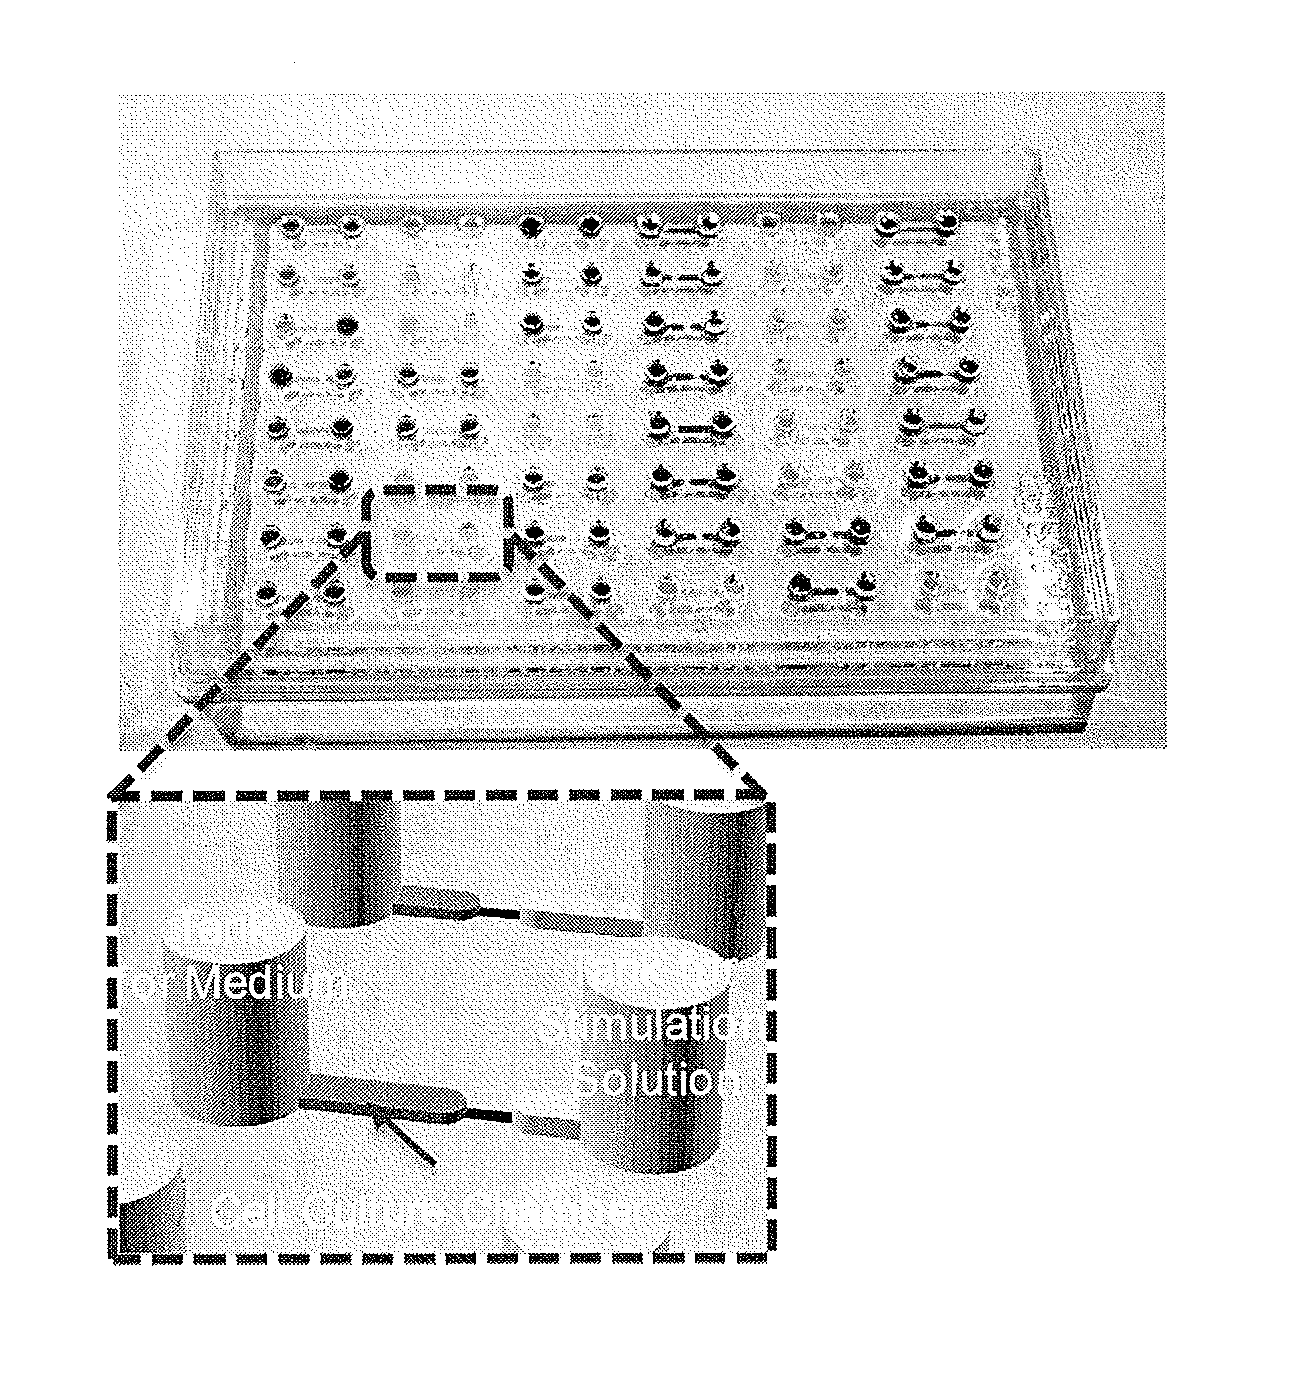 Microfluid device and three-dimensional microculture method for cell